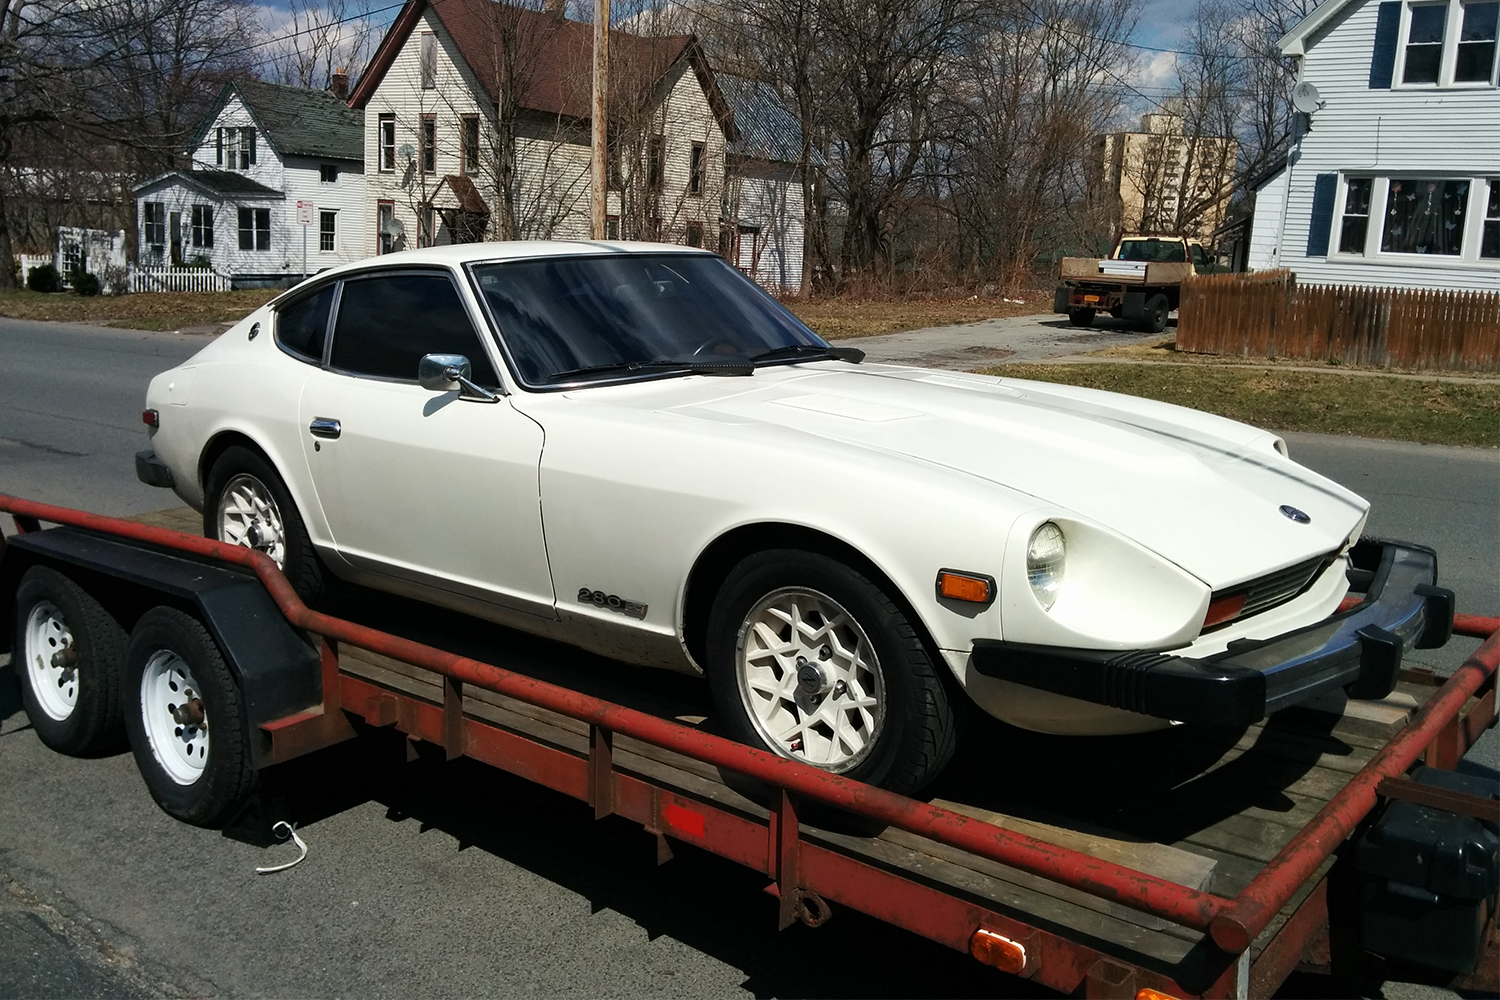 A white 1978 Datsun 280Z with snowflake wheels and a giant bumper on a trailer. We talk about what it's like to own the classic '70s sports car.